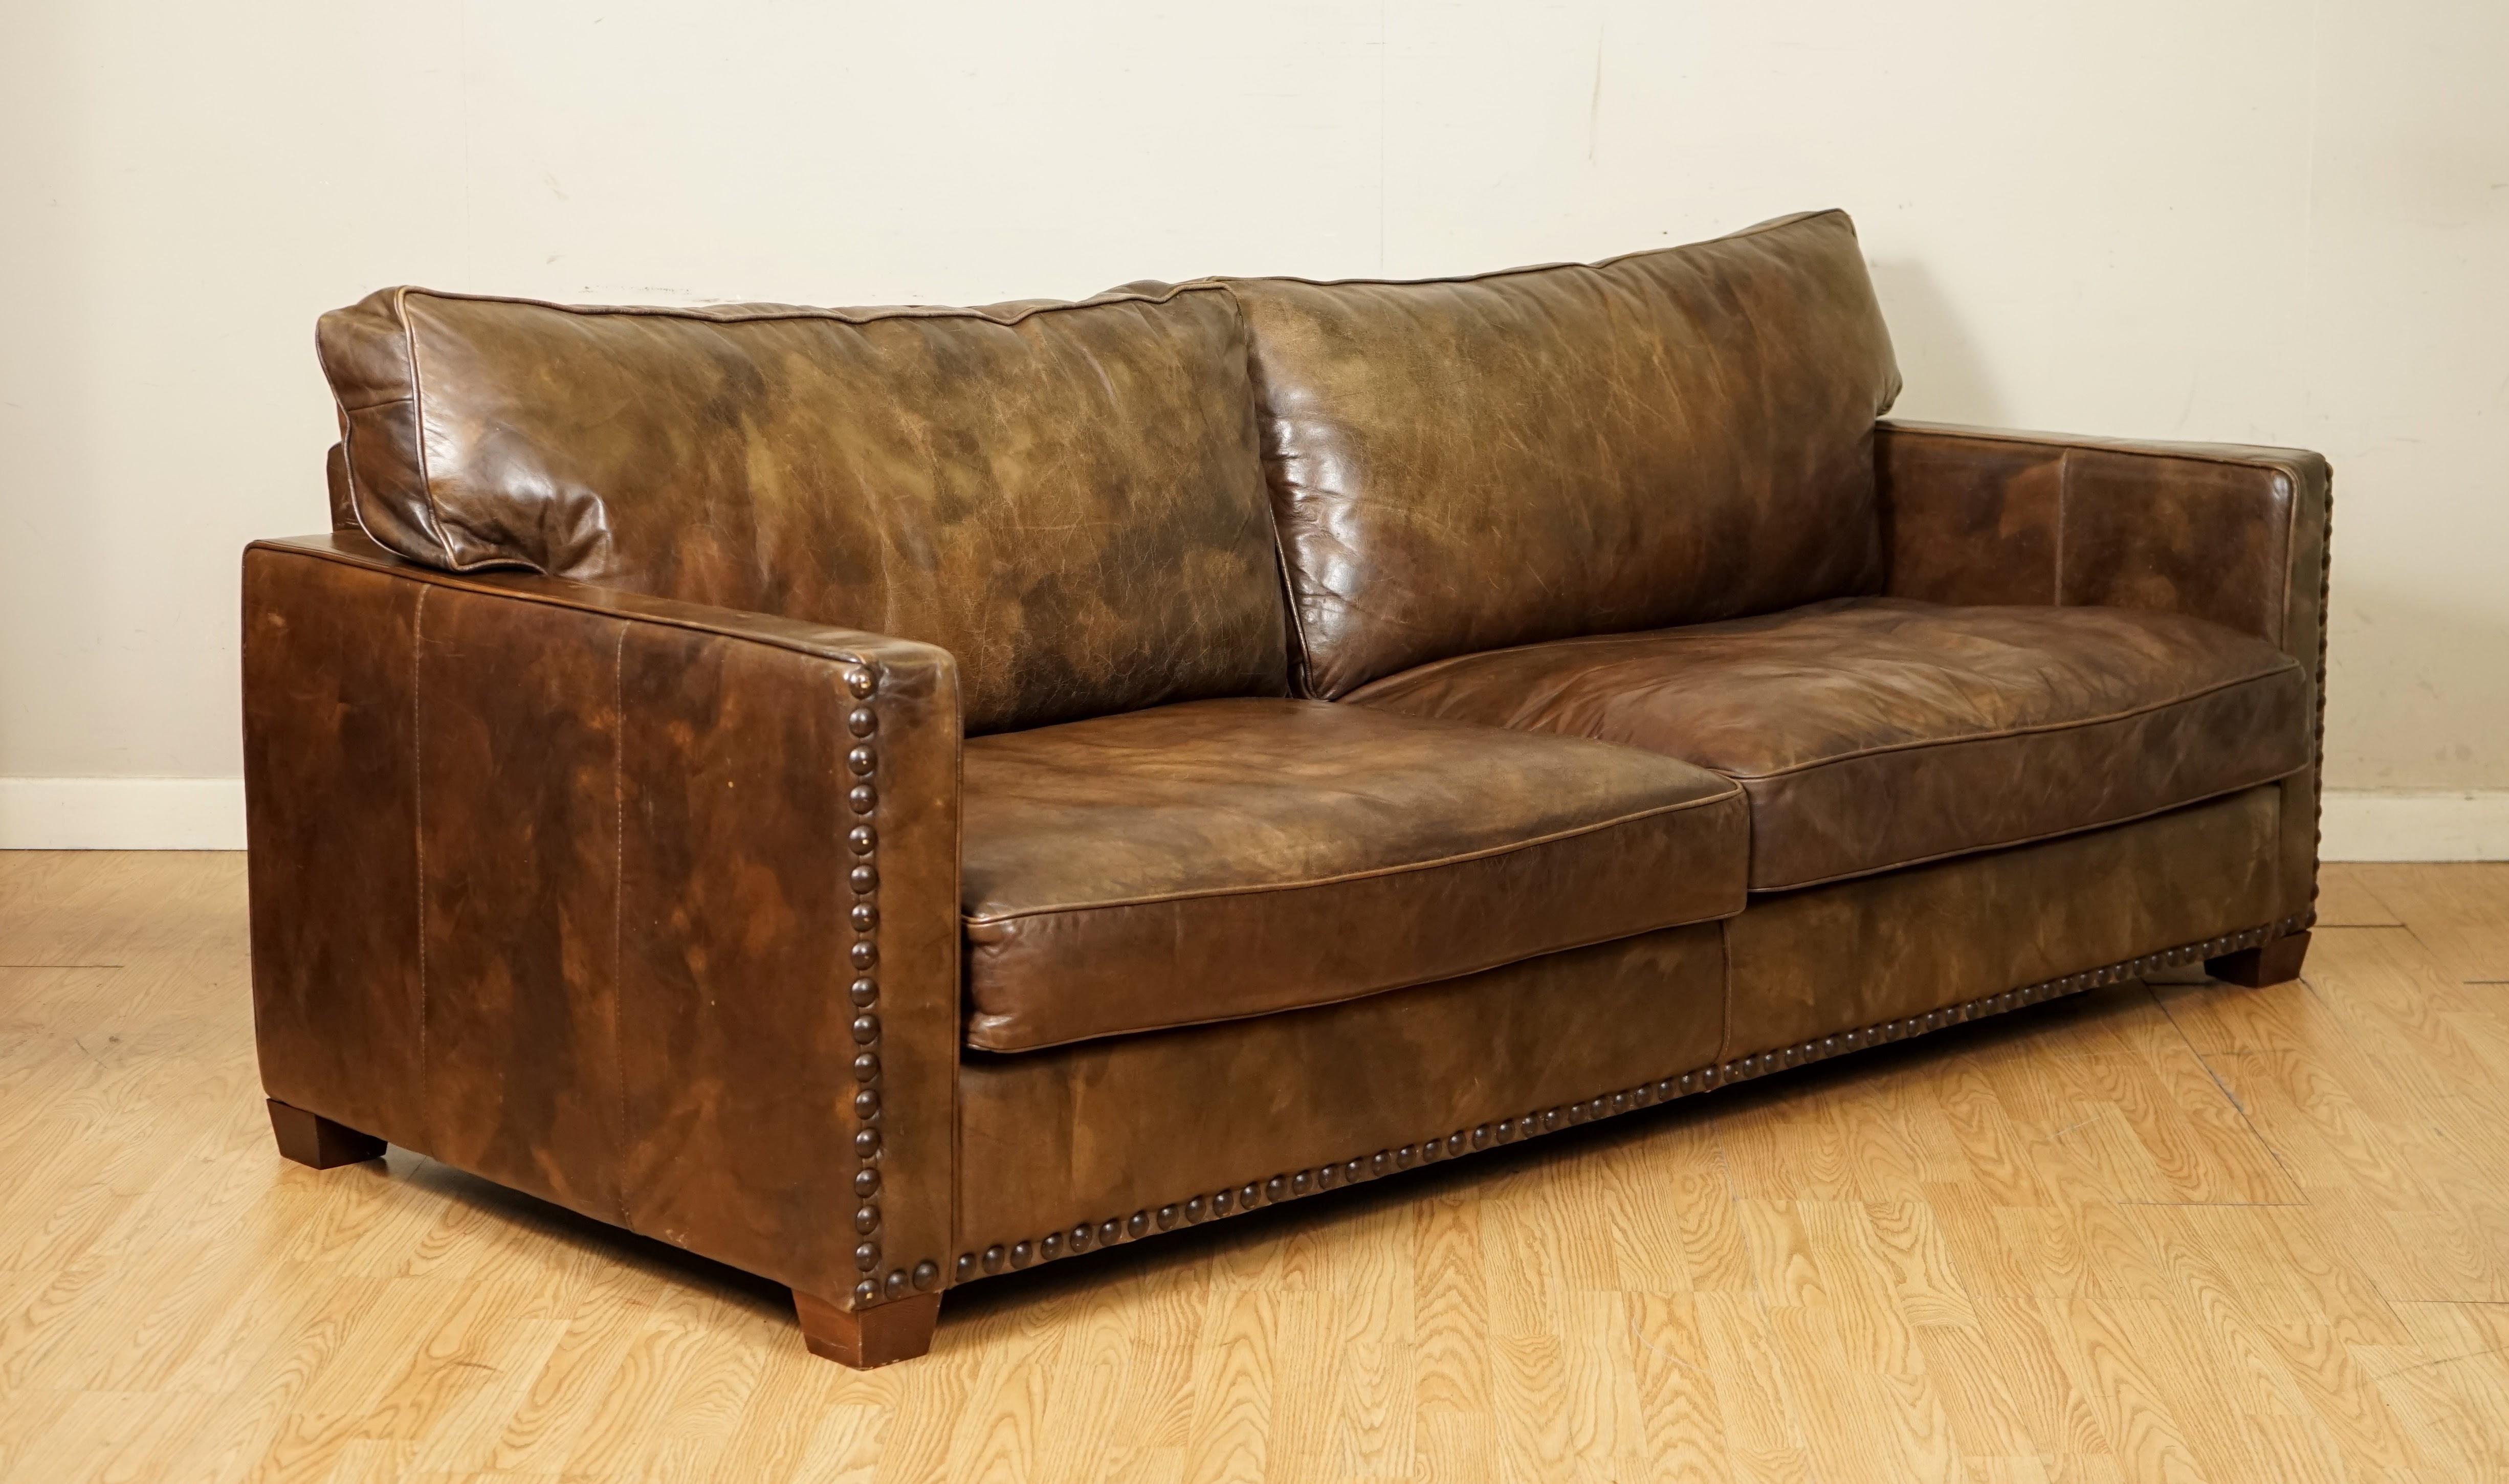 We are so excited to present to you this Gorgeous Timothy Oulton Heritage Brown Leather Sofa.

The Viscount William range is a true Timothy Oulton Classic, looking comfortably at home everywhere from modern loft apartments to more traditionally